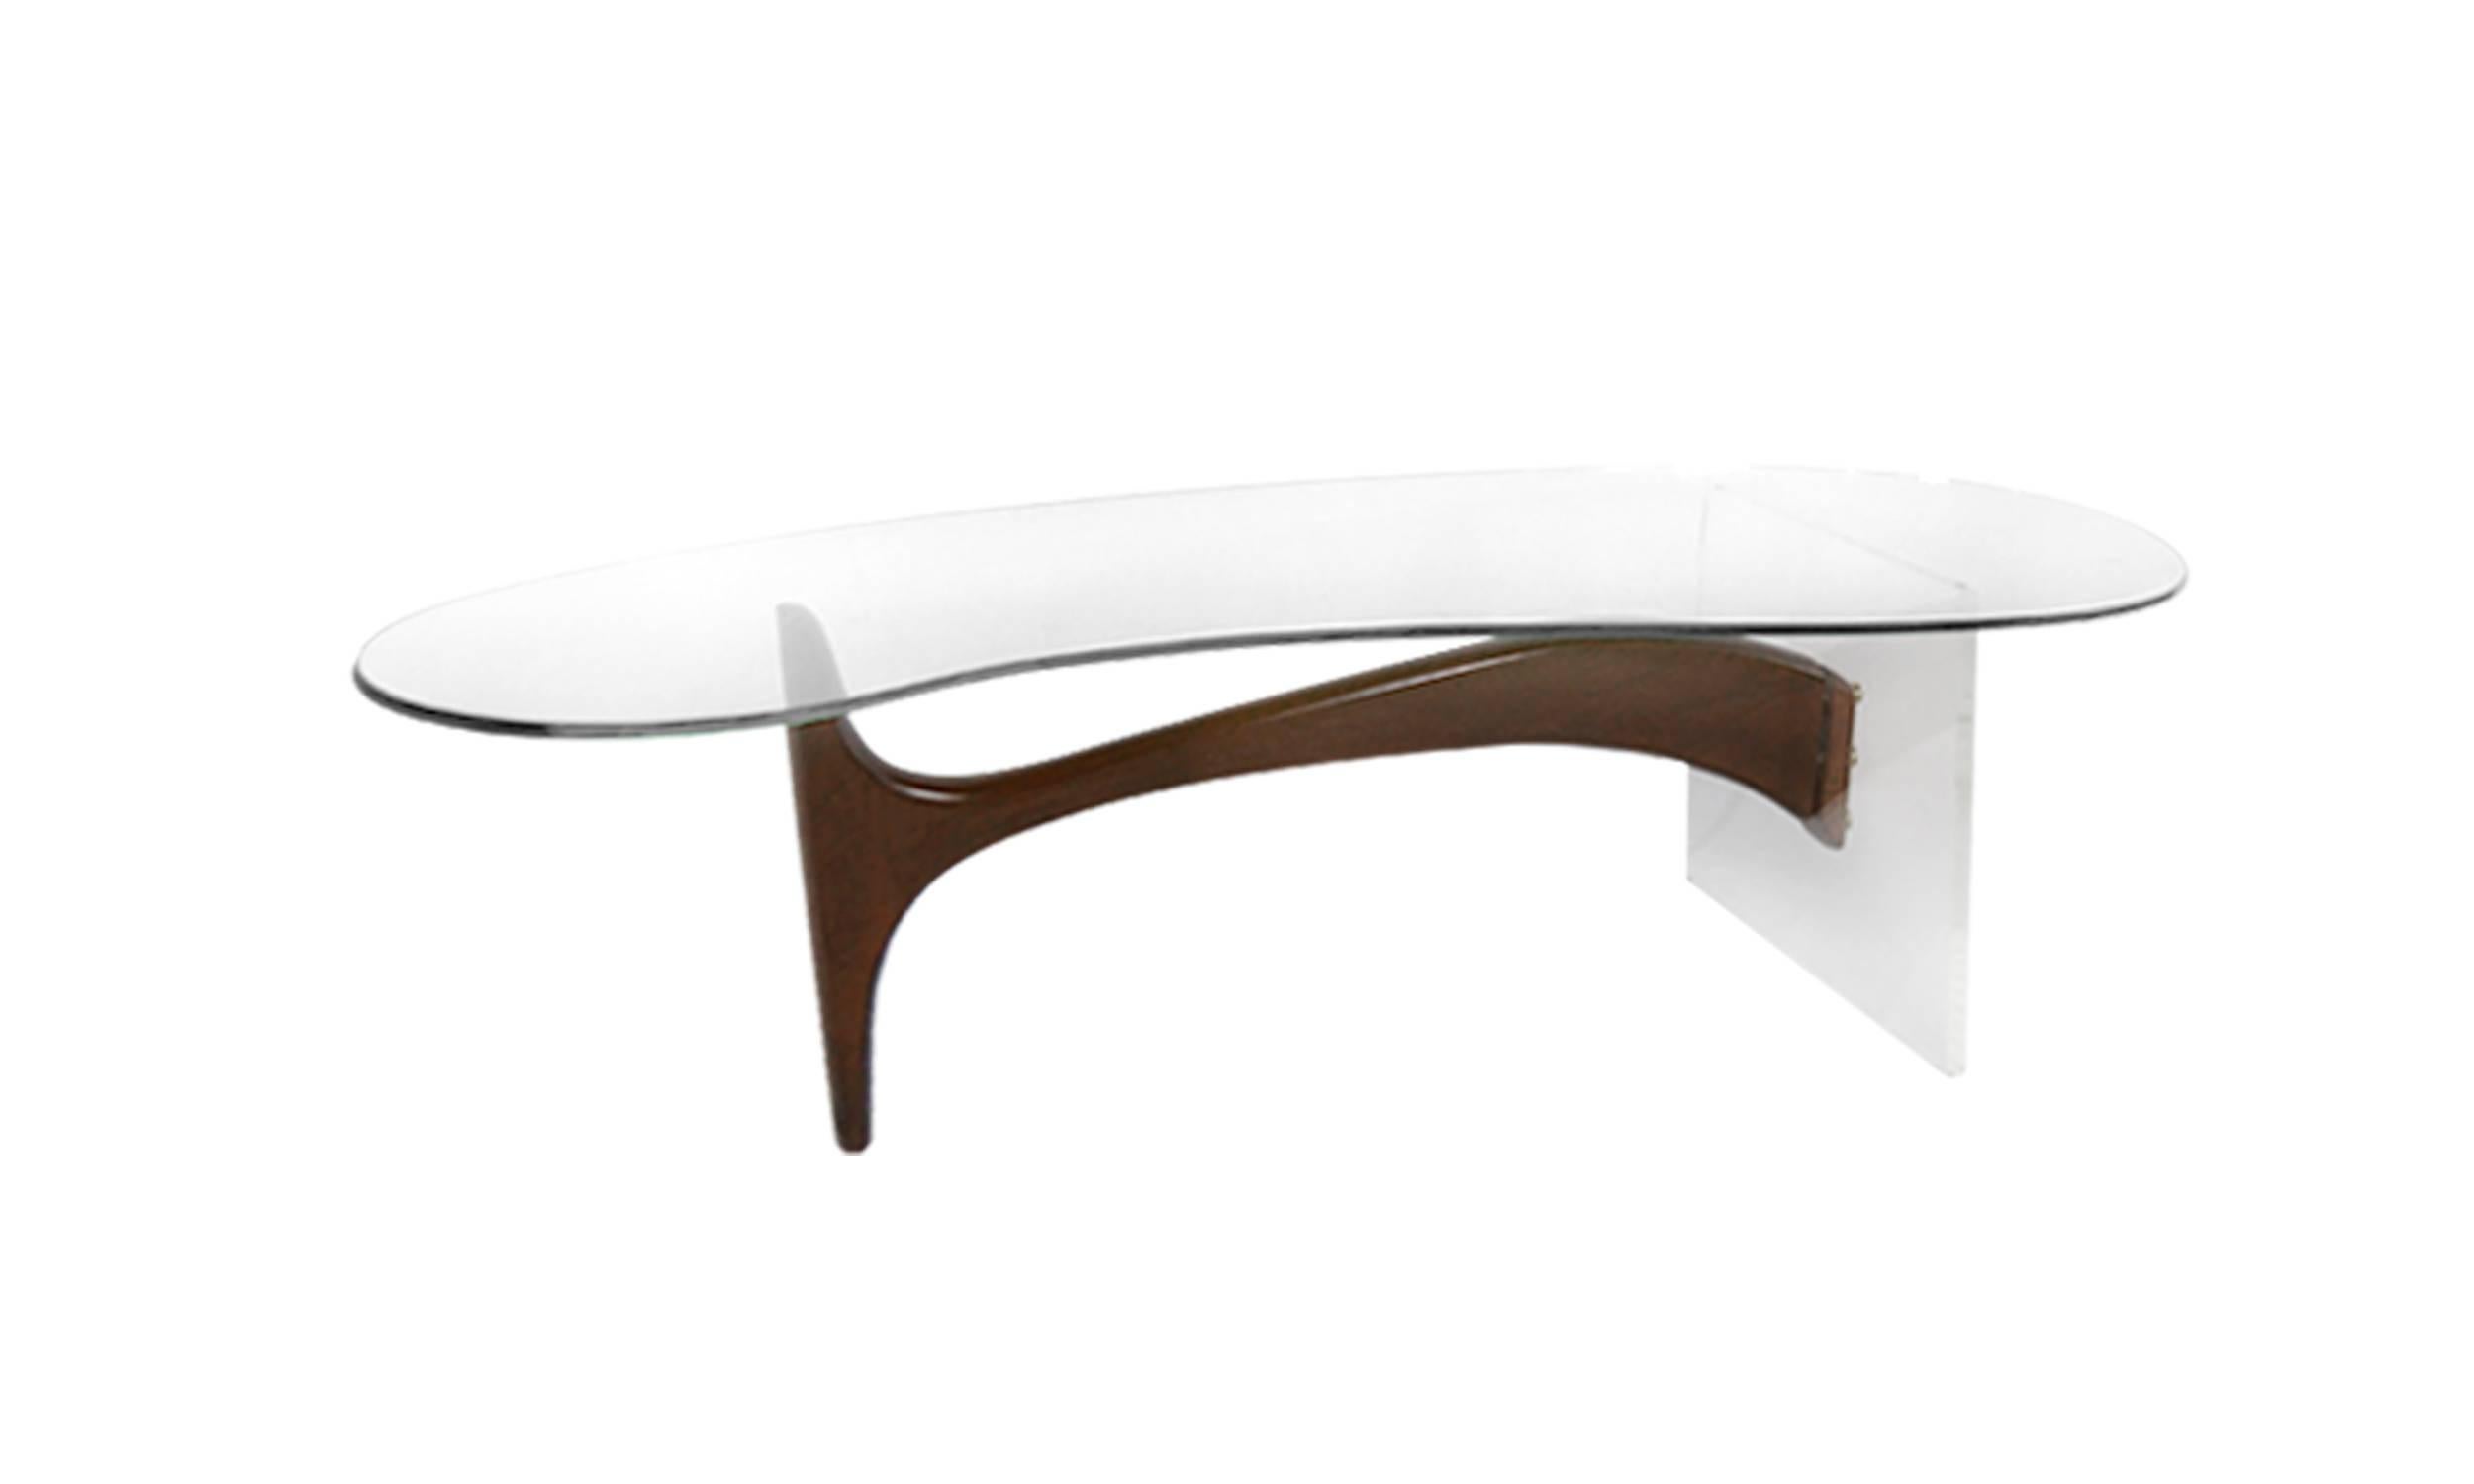 A phenomenal sculptural cocktail table featuring a biomorphic 